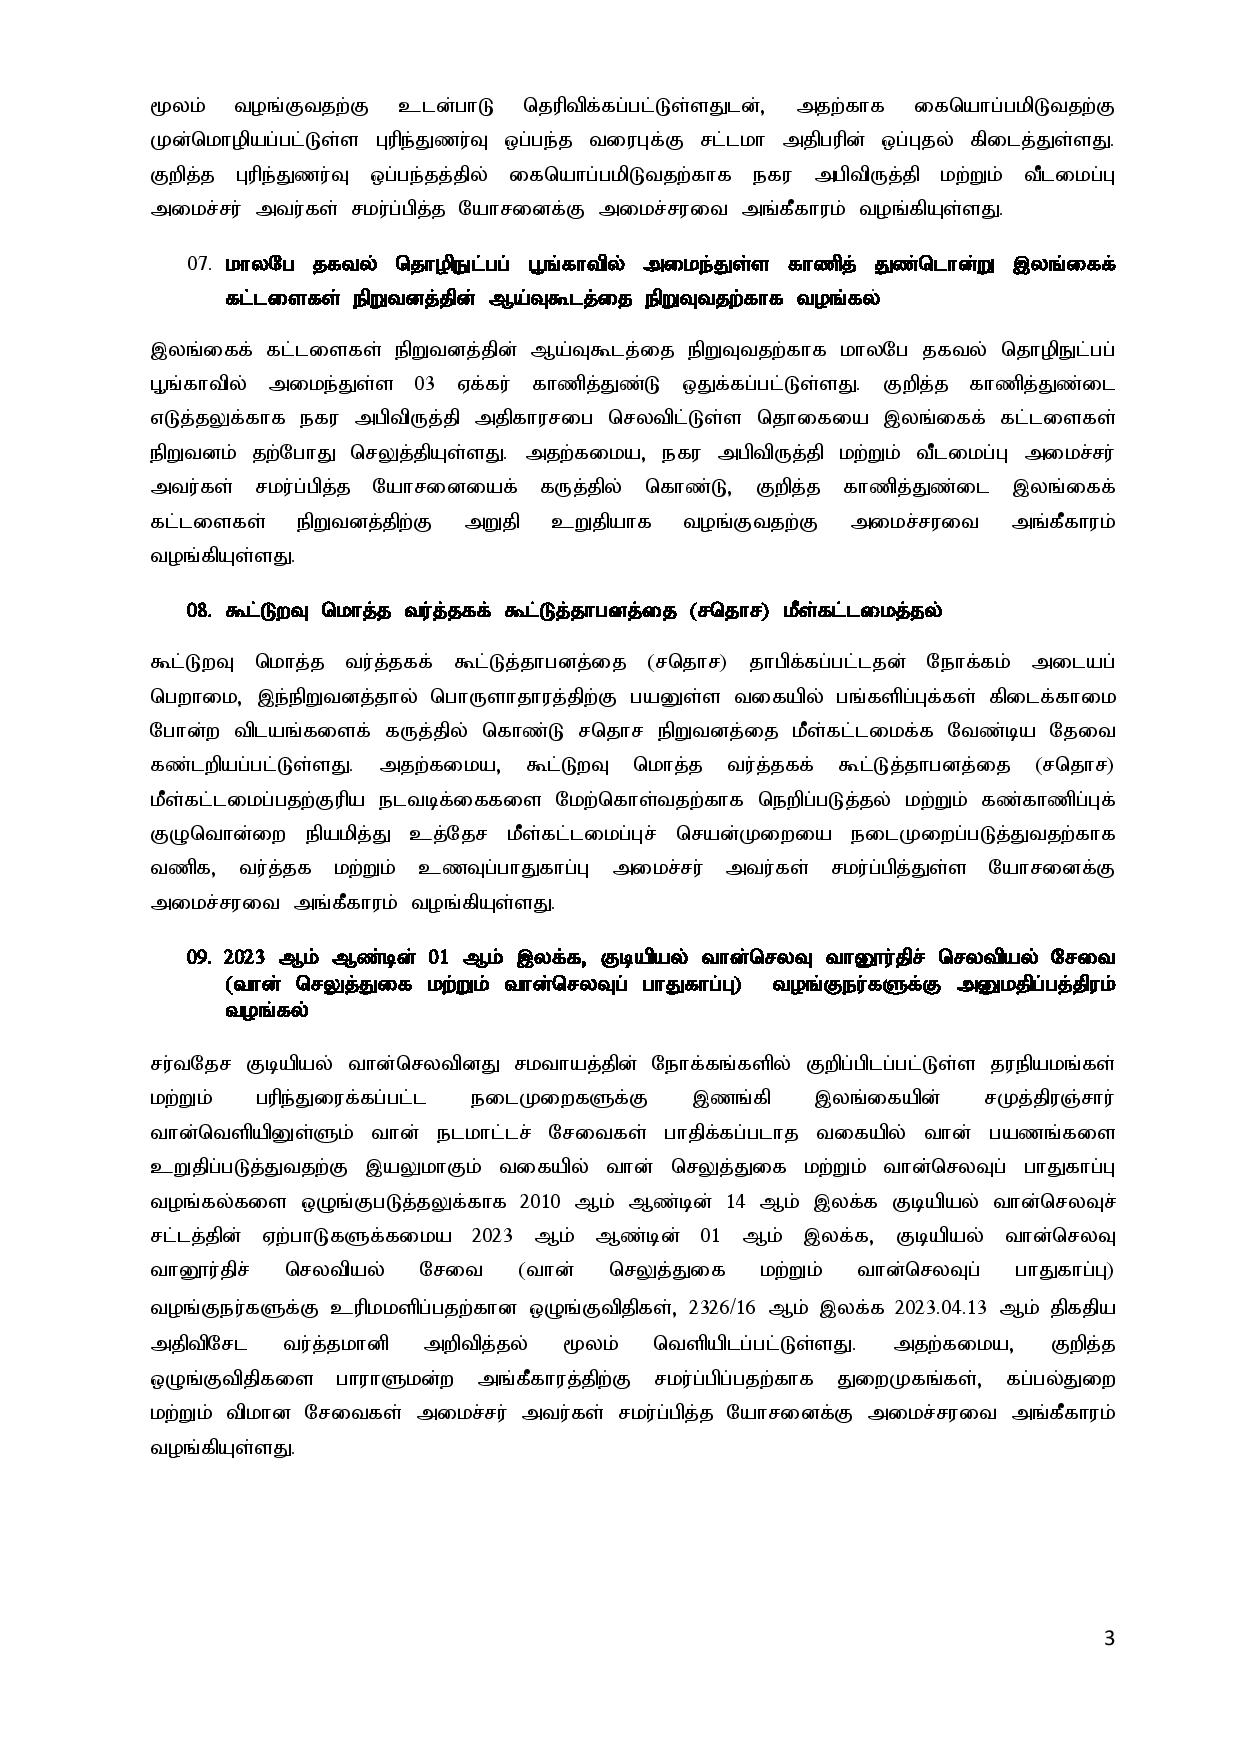 Cabinet Decisions on 10.07.2023 Tamil page 003